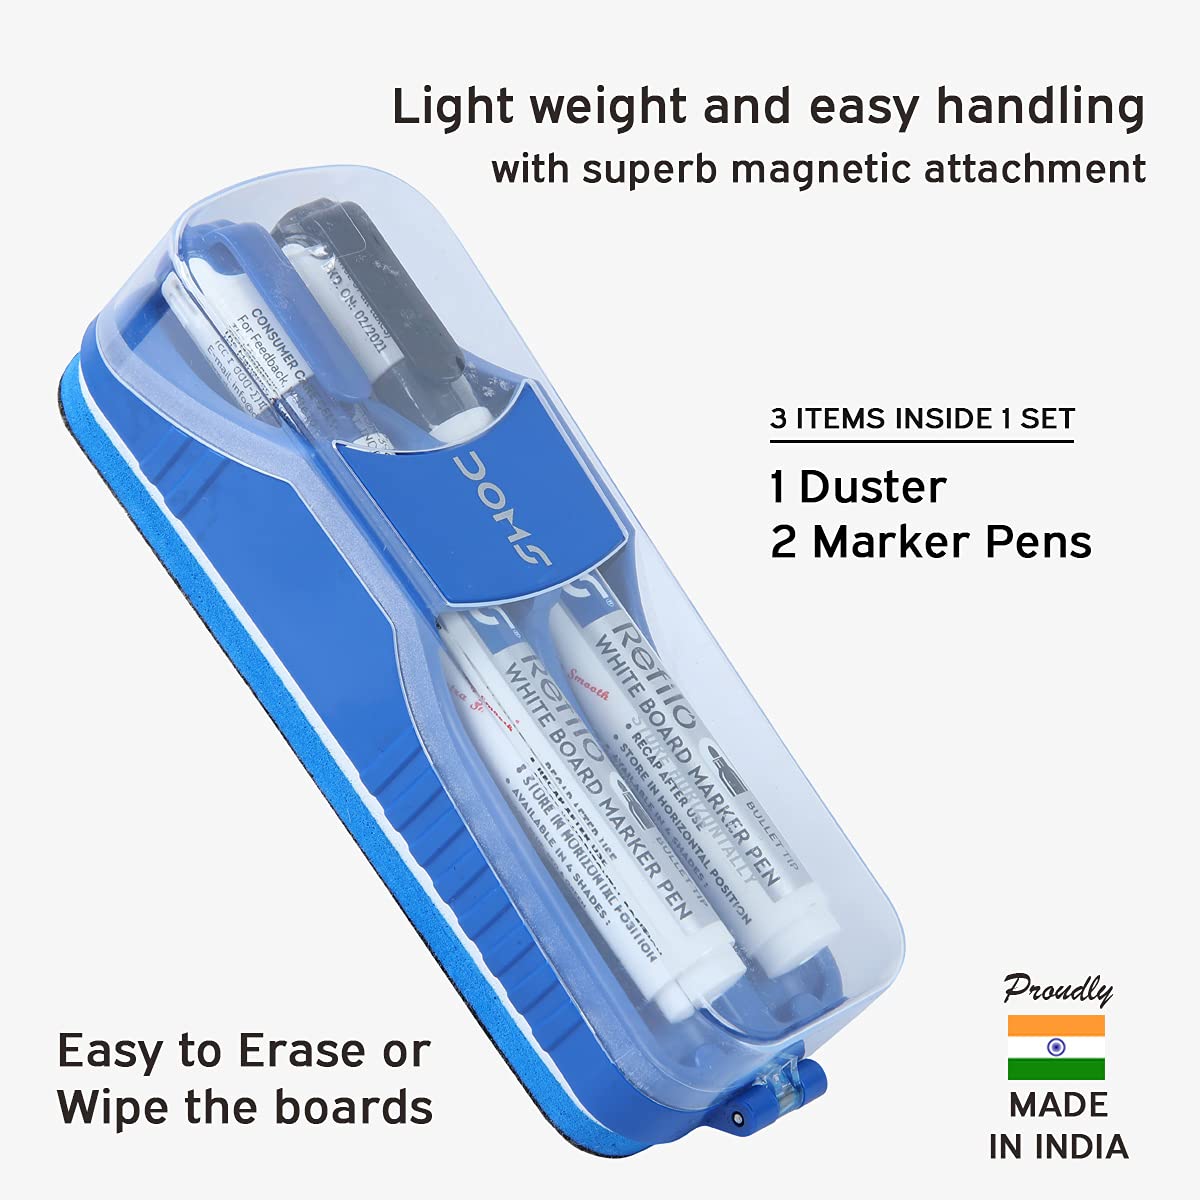 Doms Magnetic Whiteboard Duster With 2 Whiteboard Marker